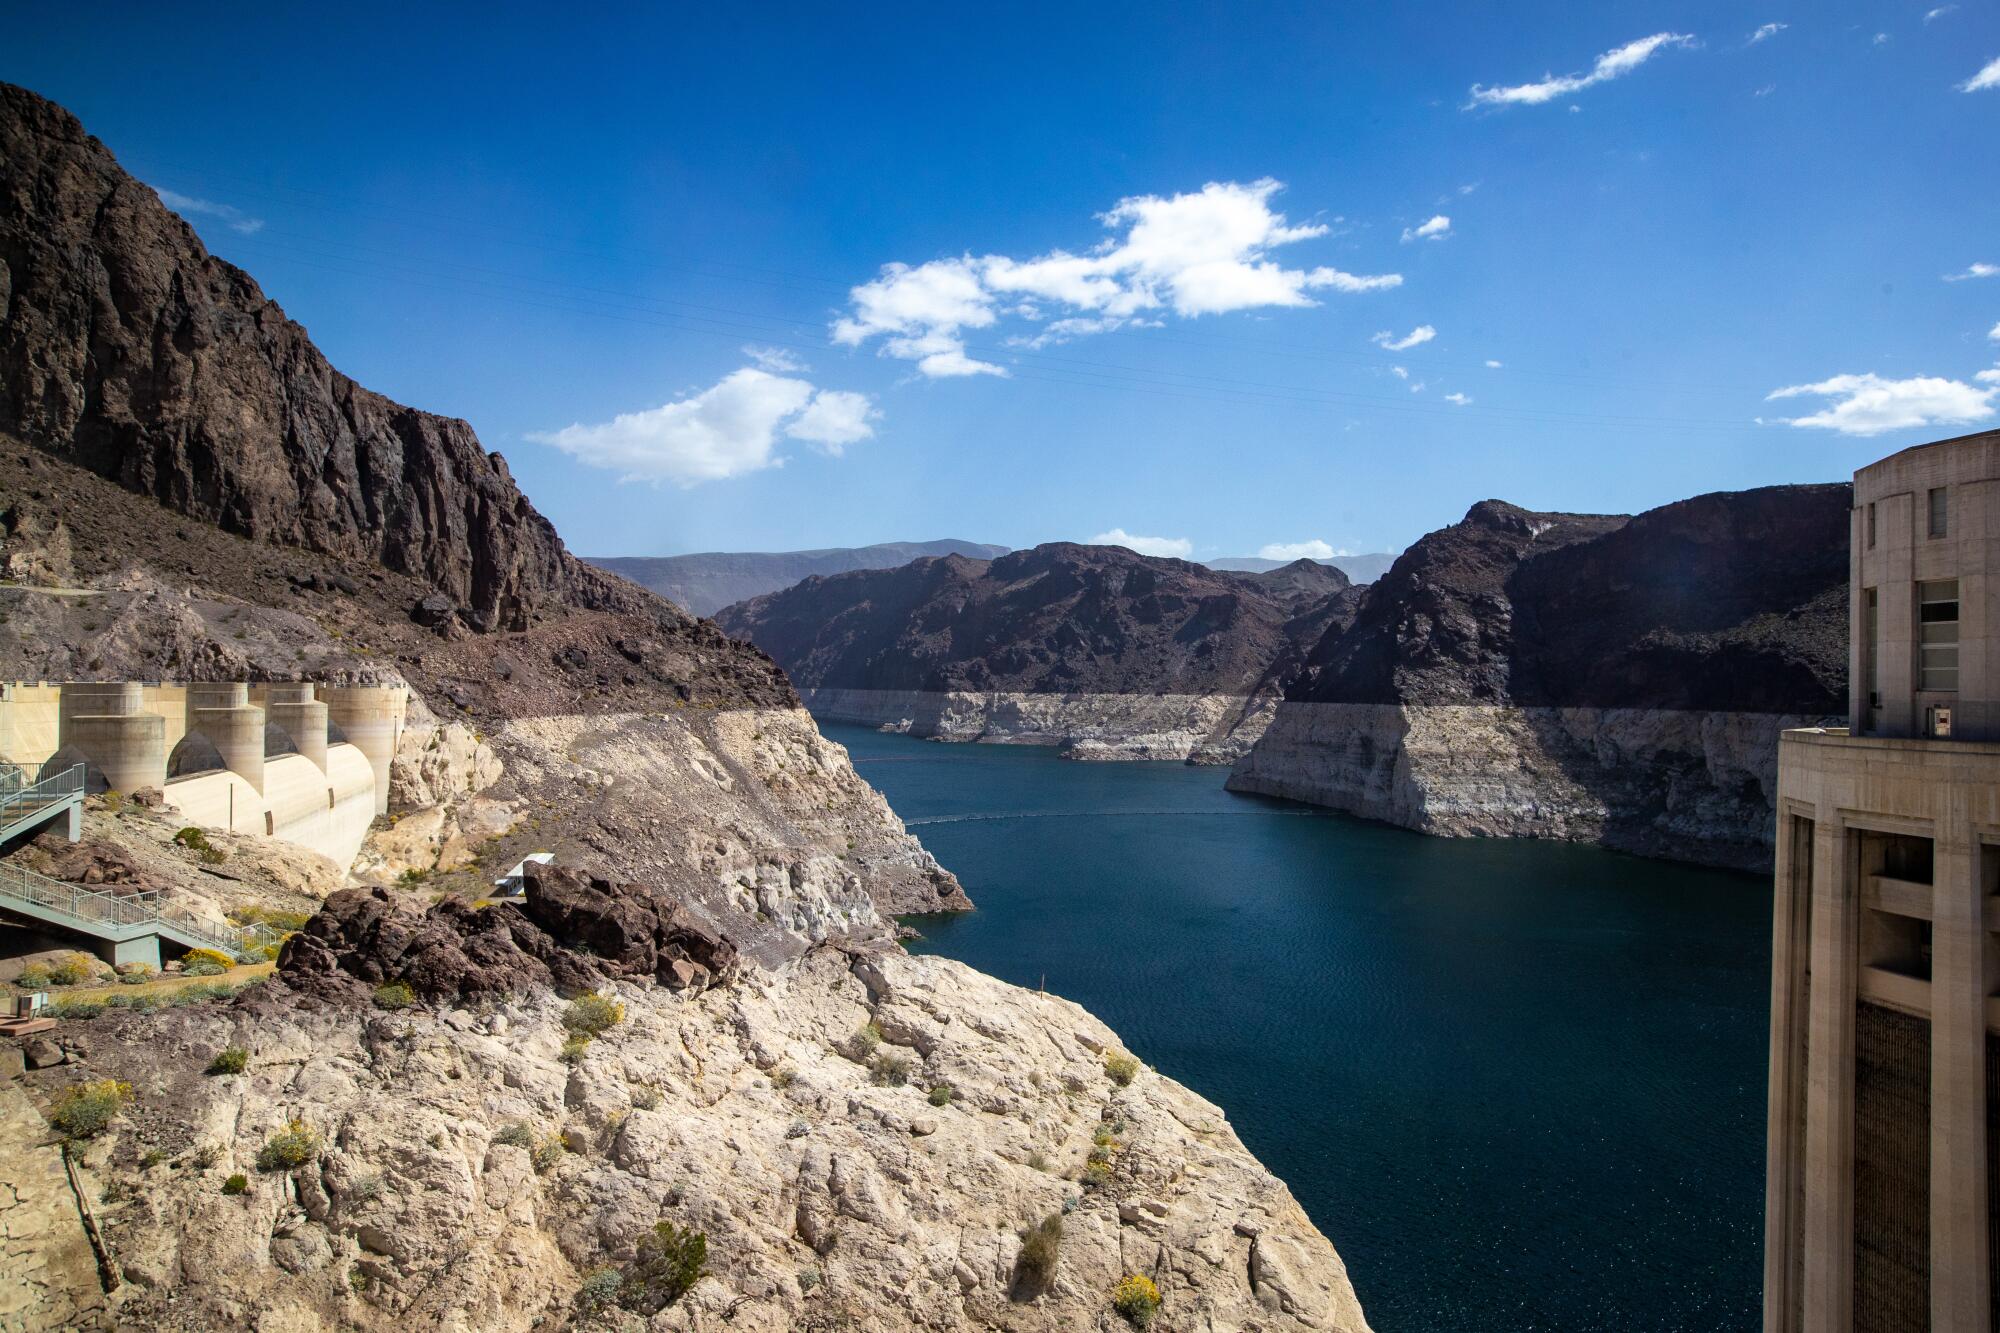 White walls around Lake Mead show how far it has declined.